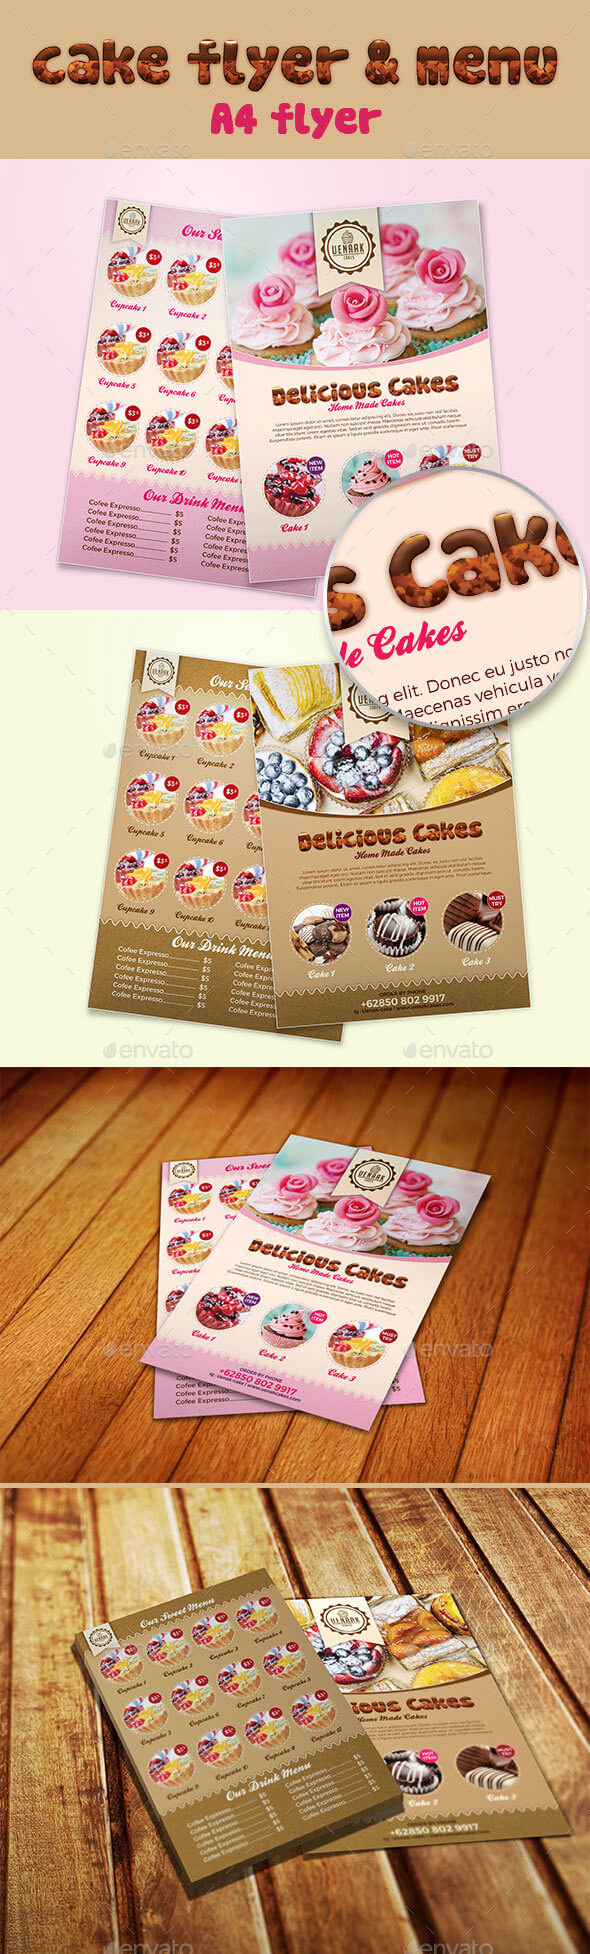 Cake Flyer Graphics, Designs & Templates From Graphicriver Inside Cake Flyer Template Free